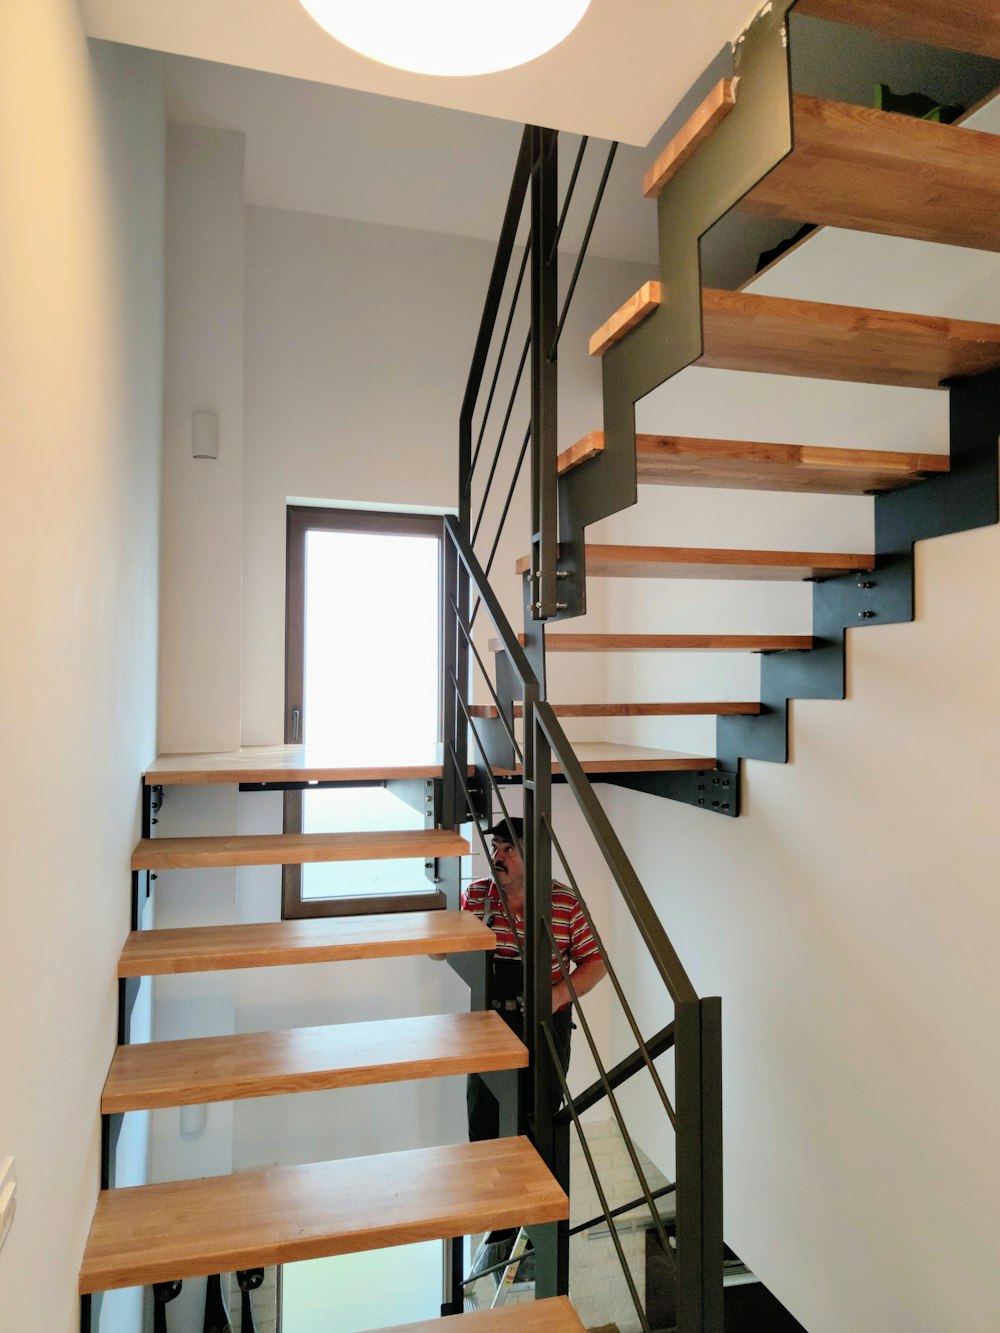 brown wooden staircase near white wall